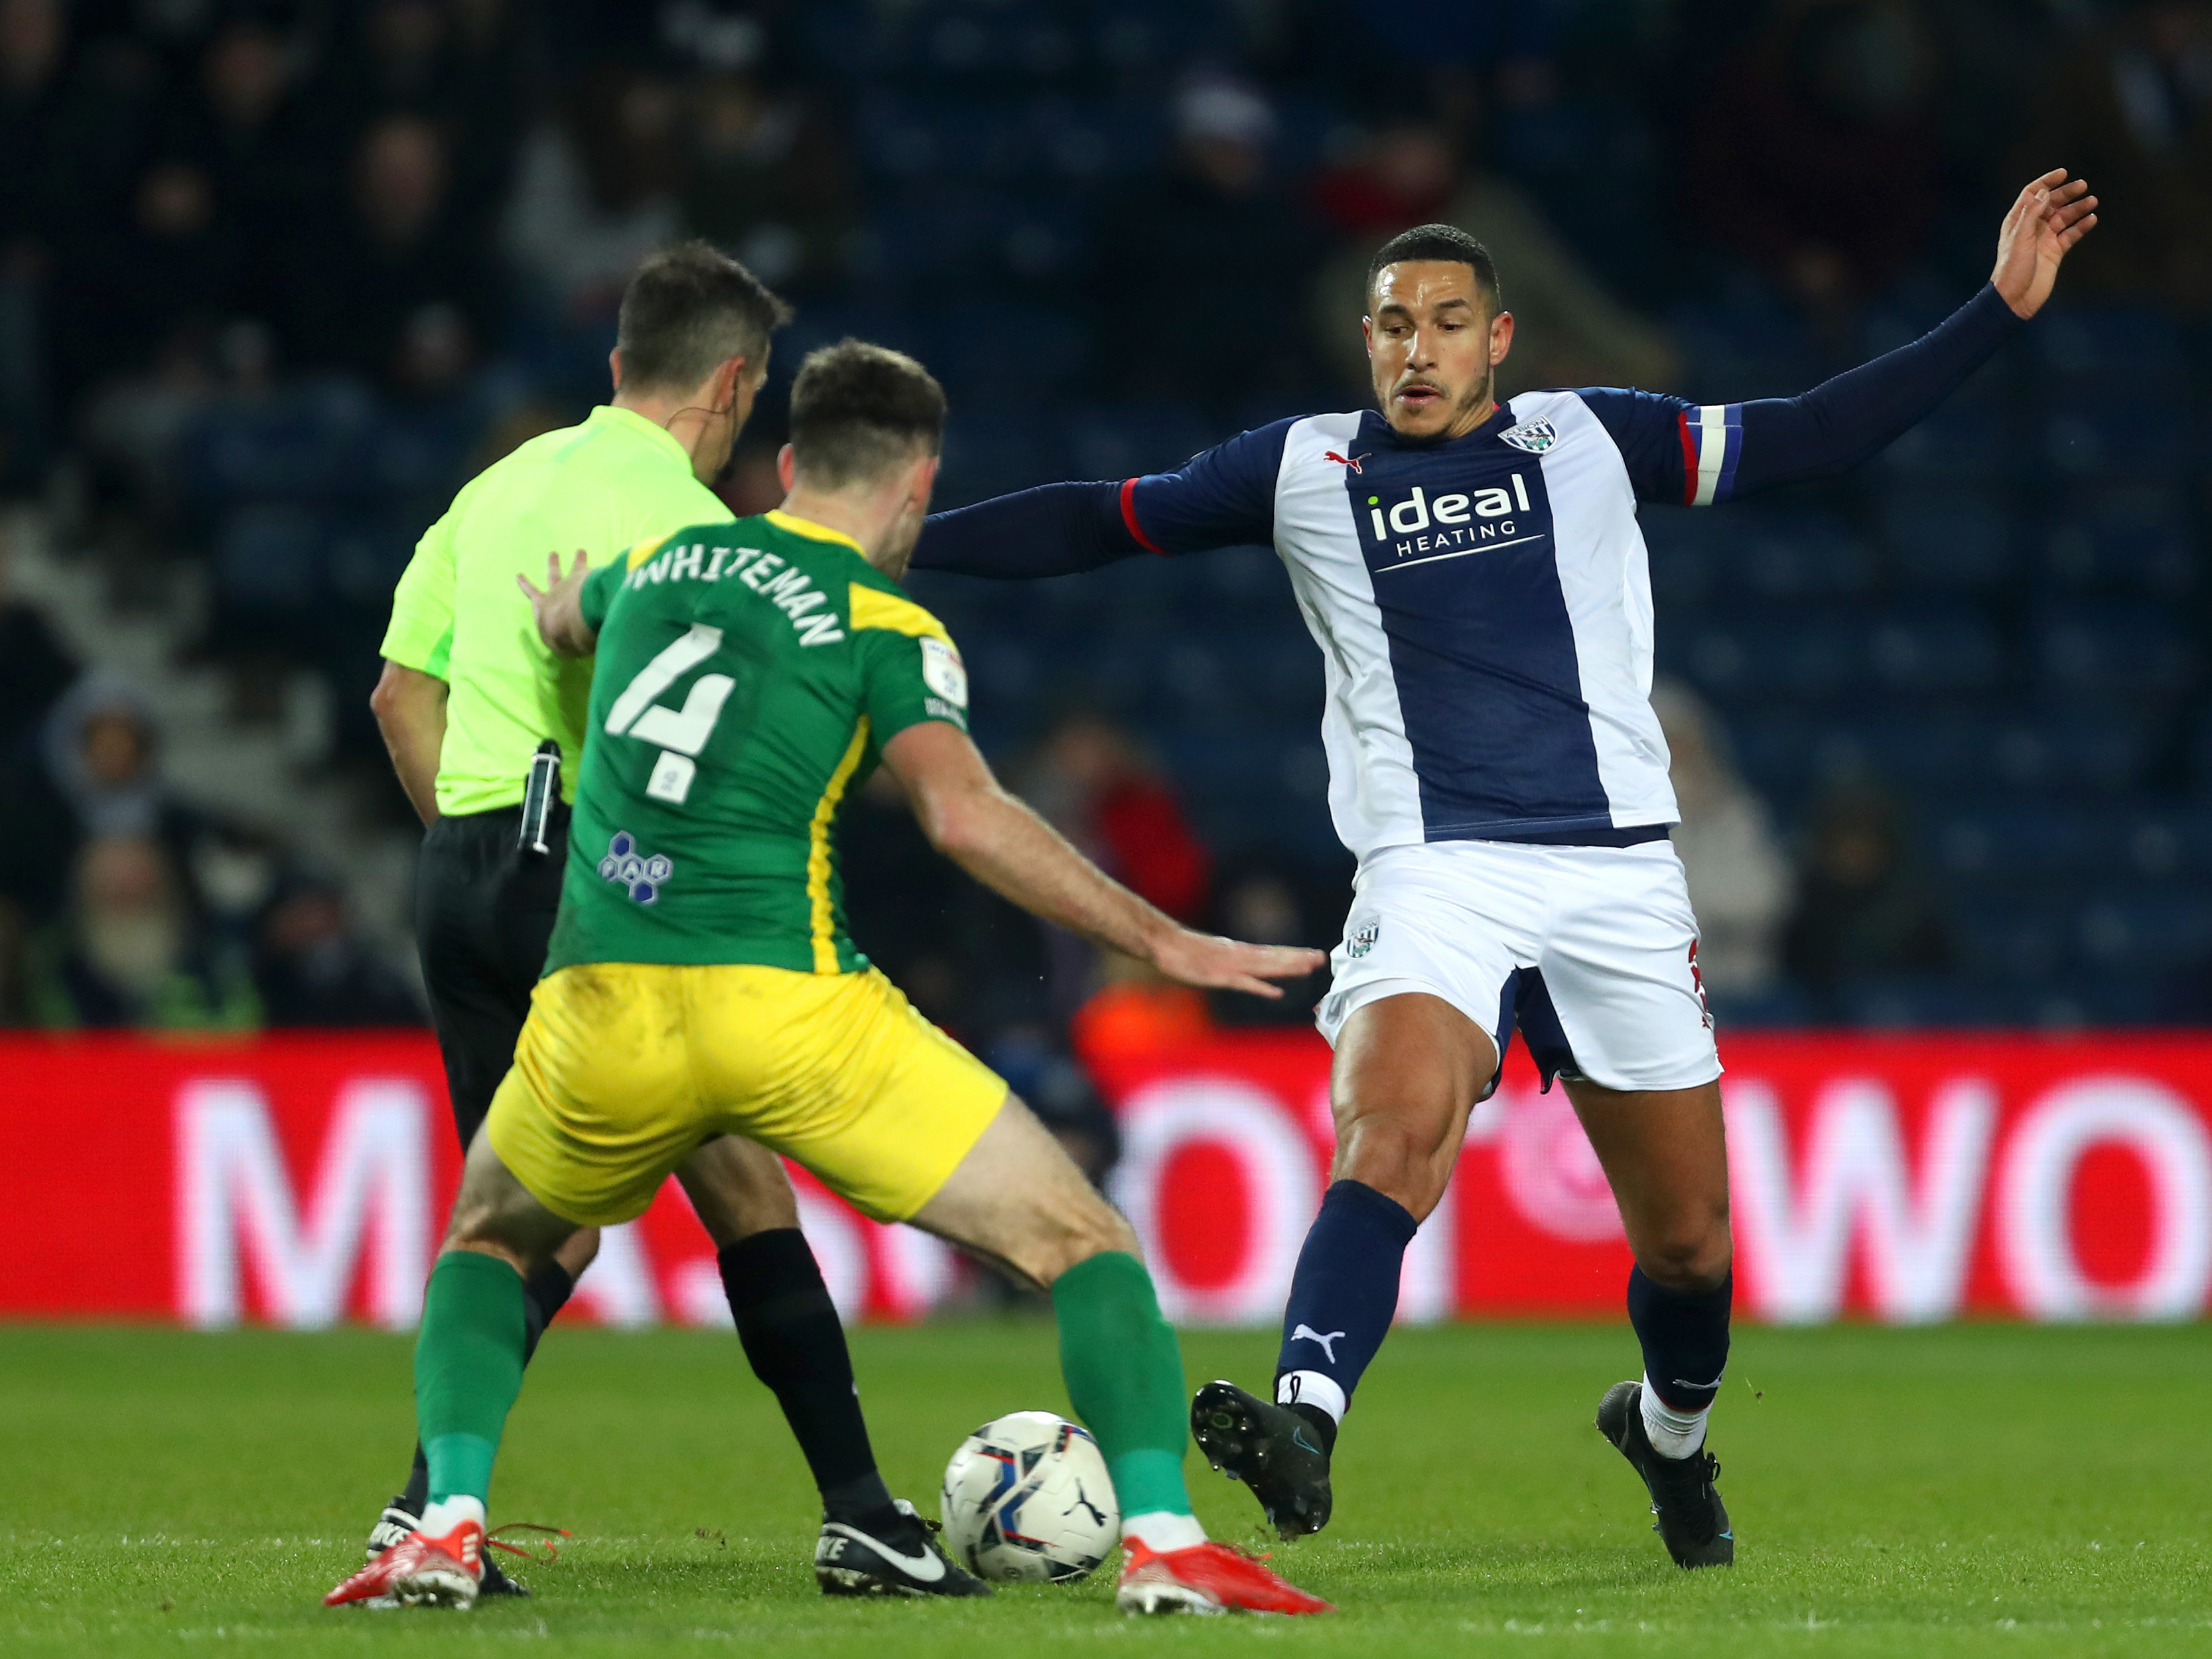 Close-range finishes from Emil Riis Jakobsen and Cameron Archer either side of half-time were enough to earn the Lillywhites all three points at The Hawthorns